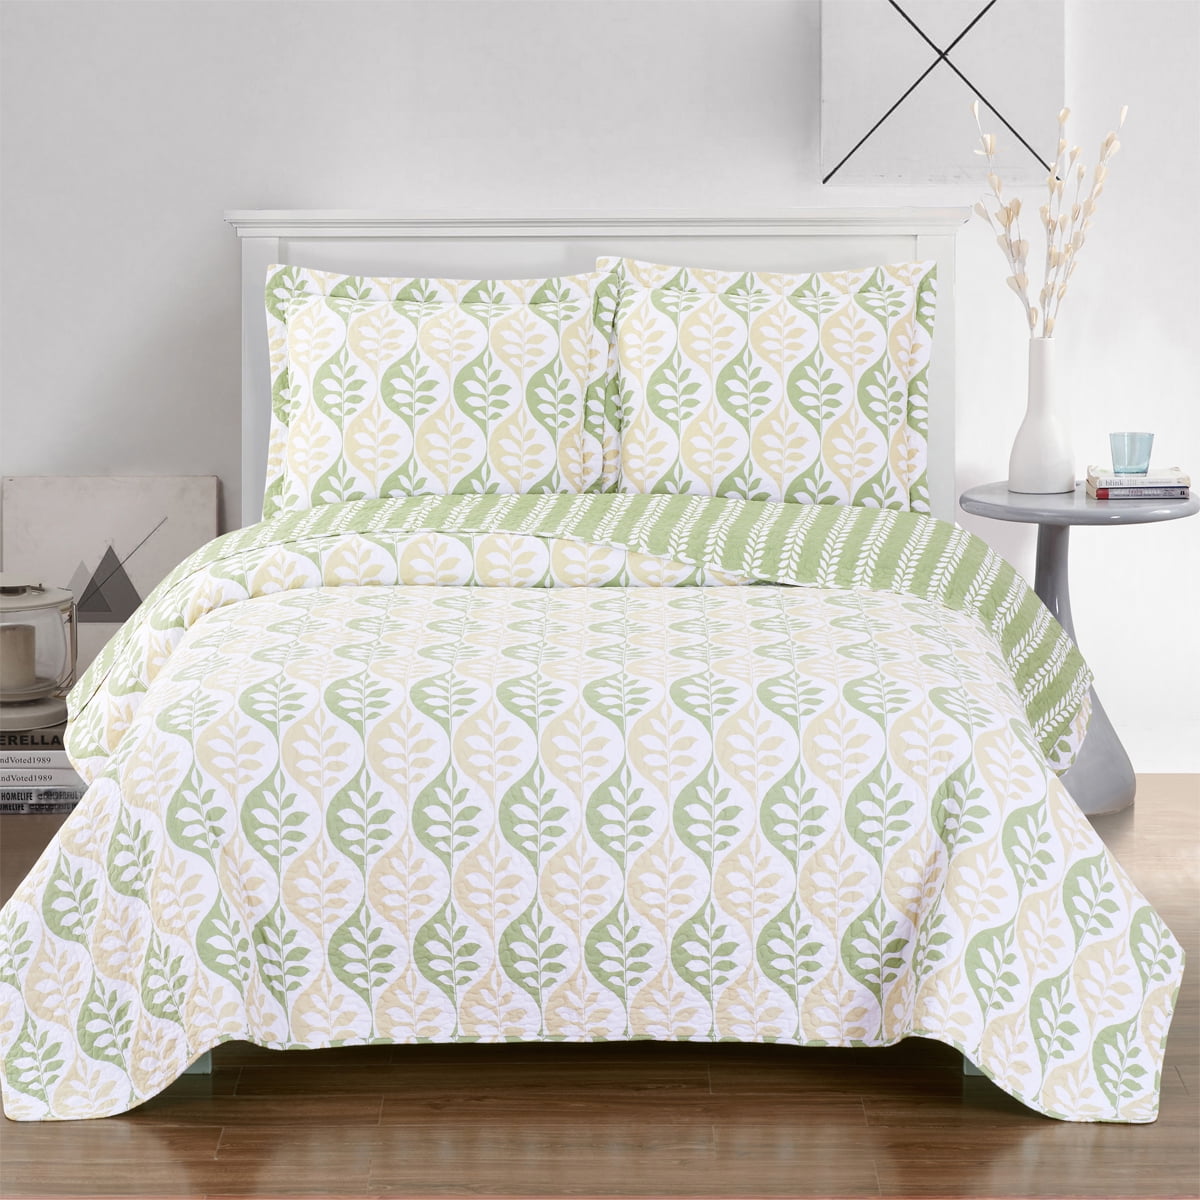 Leahanna Reversible Bedspread Coverlet Quilt Set Bedding Cover Twin Queen King 